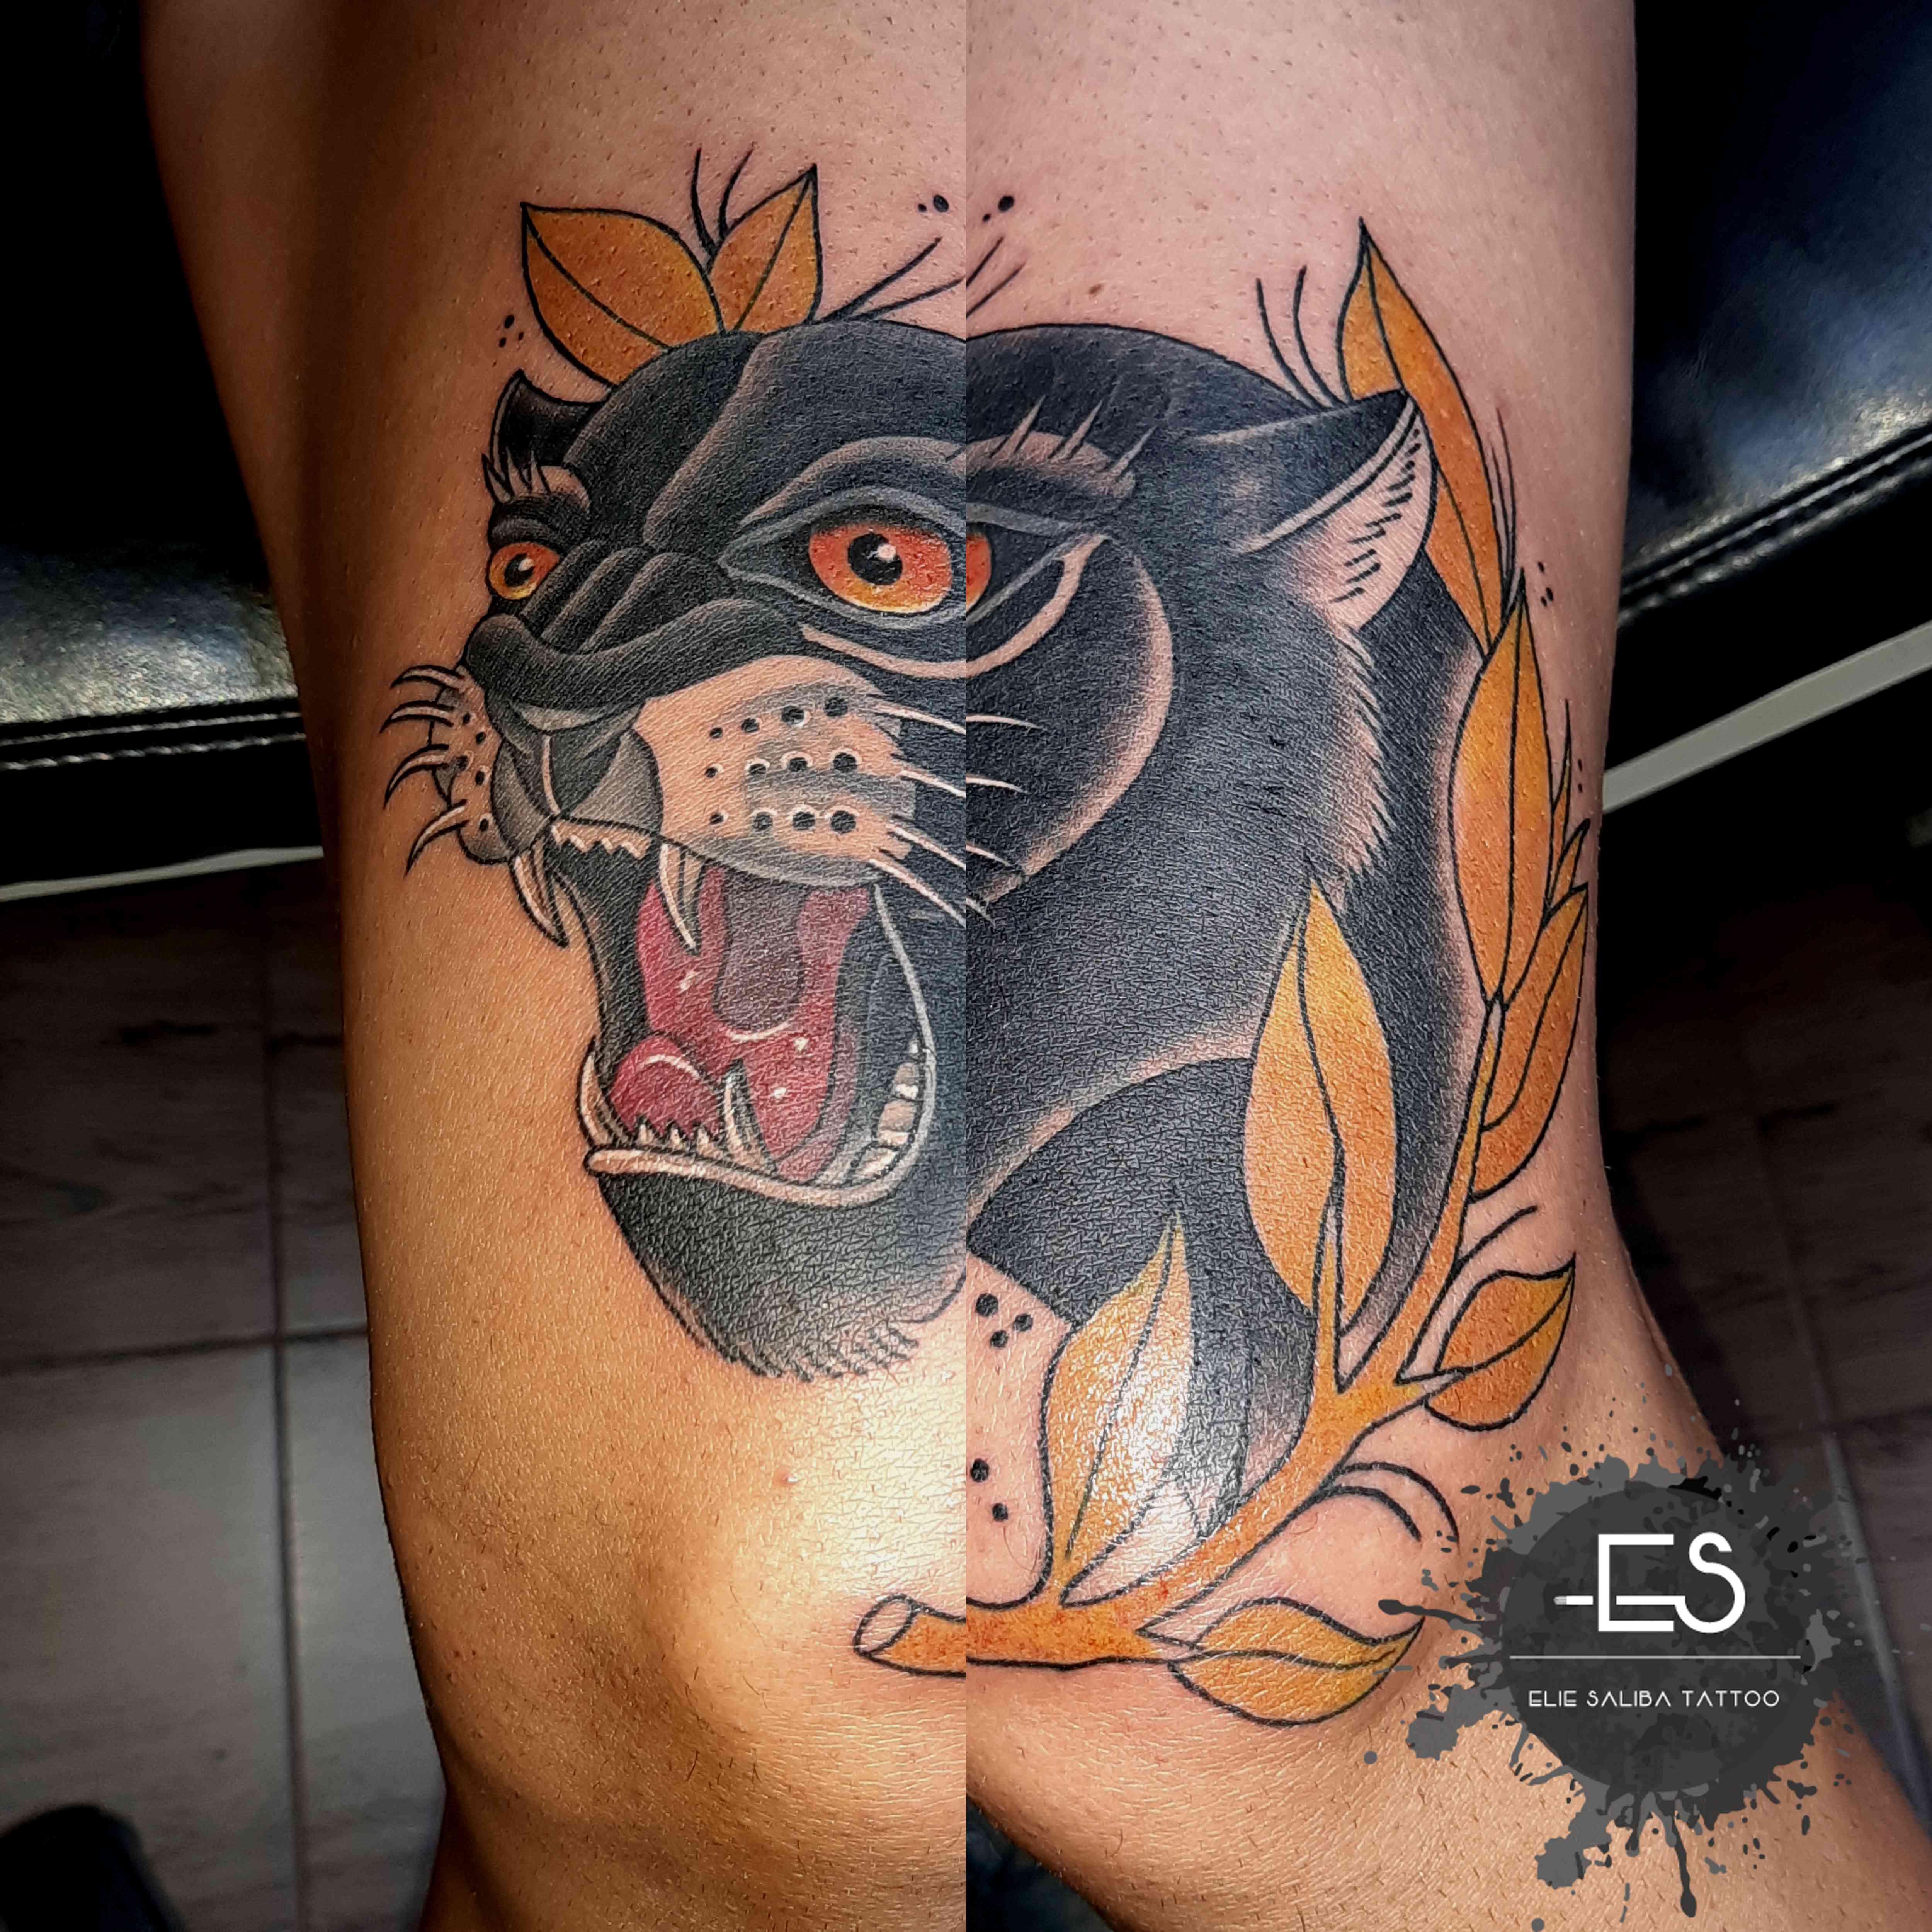 Top 11 Best Traditional Panther Head Tattoo